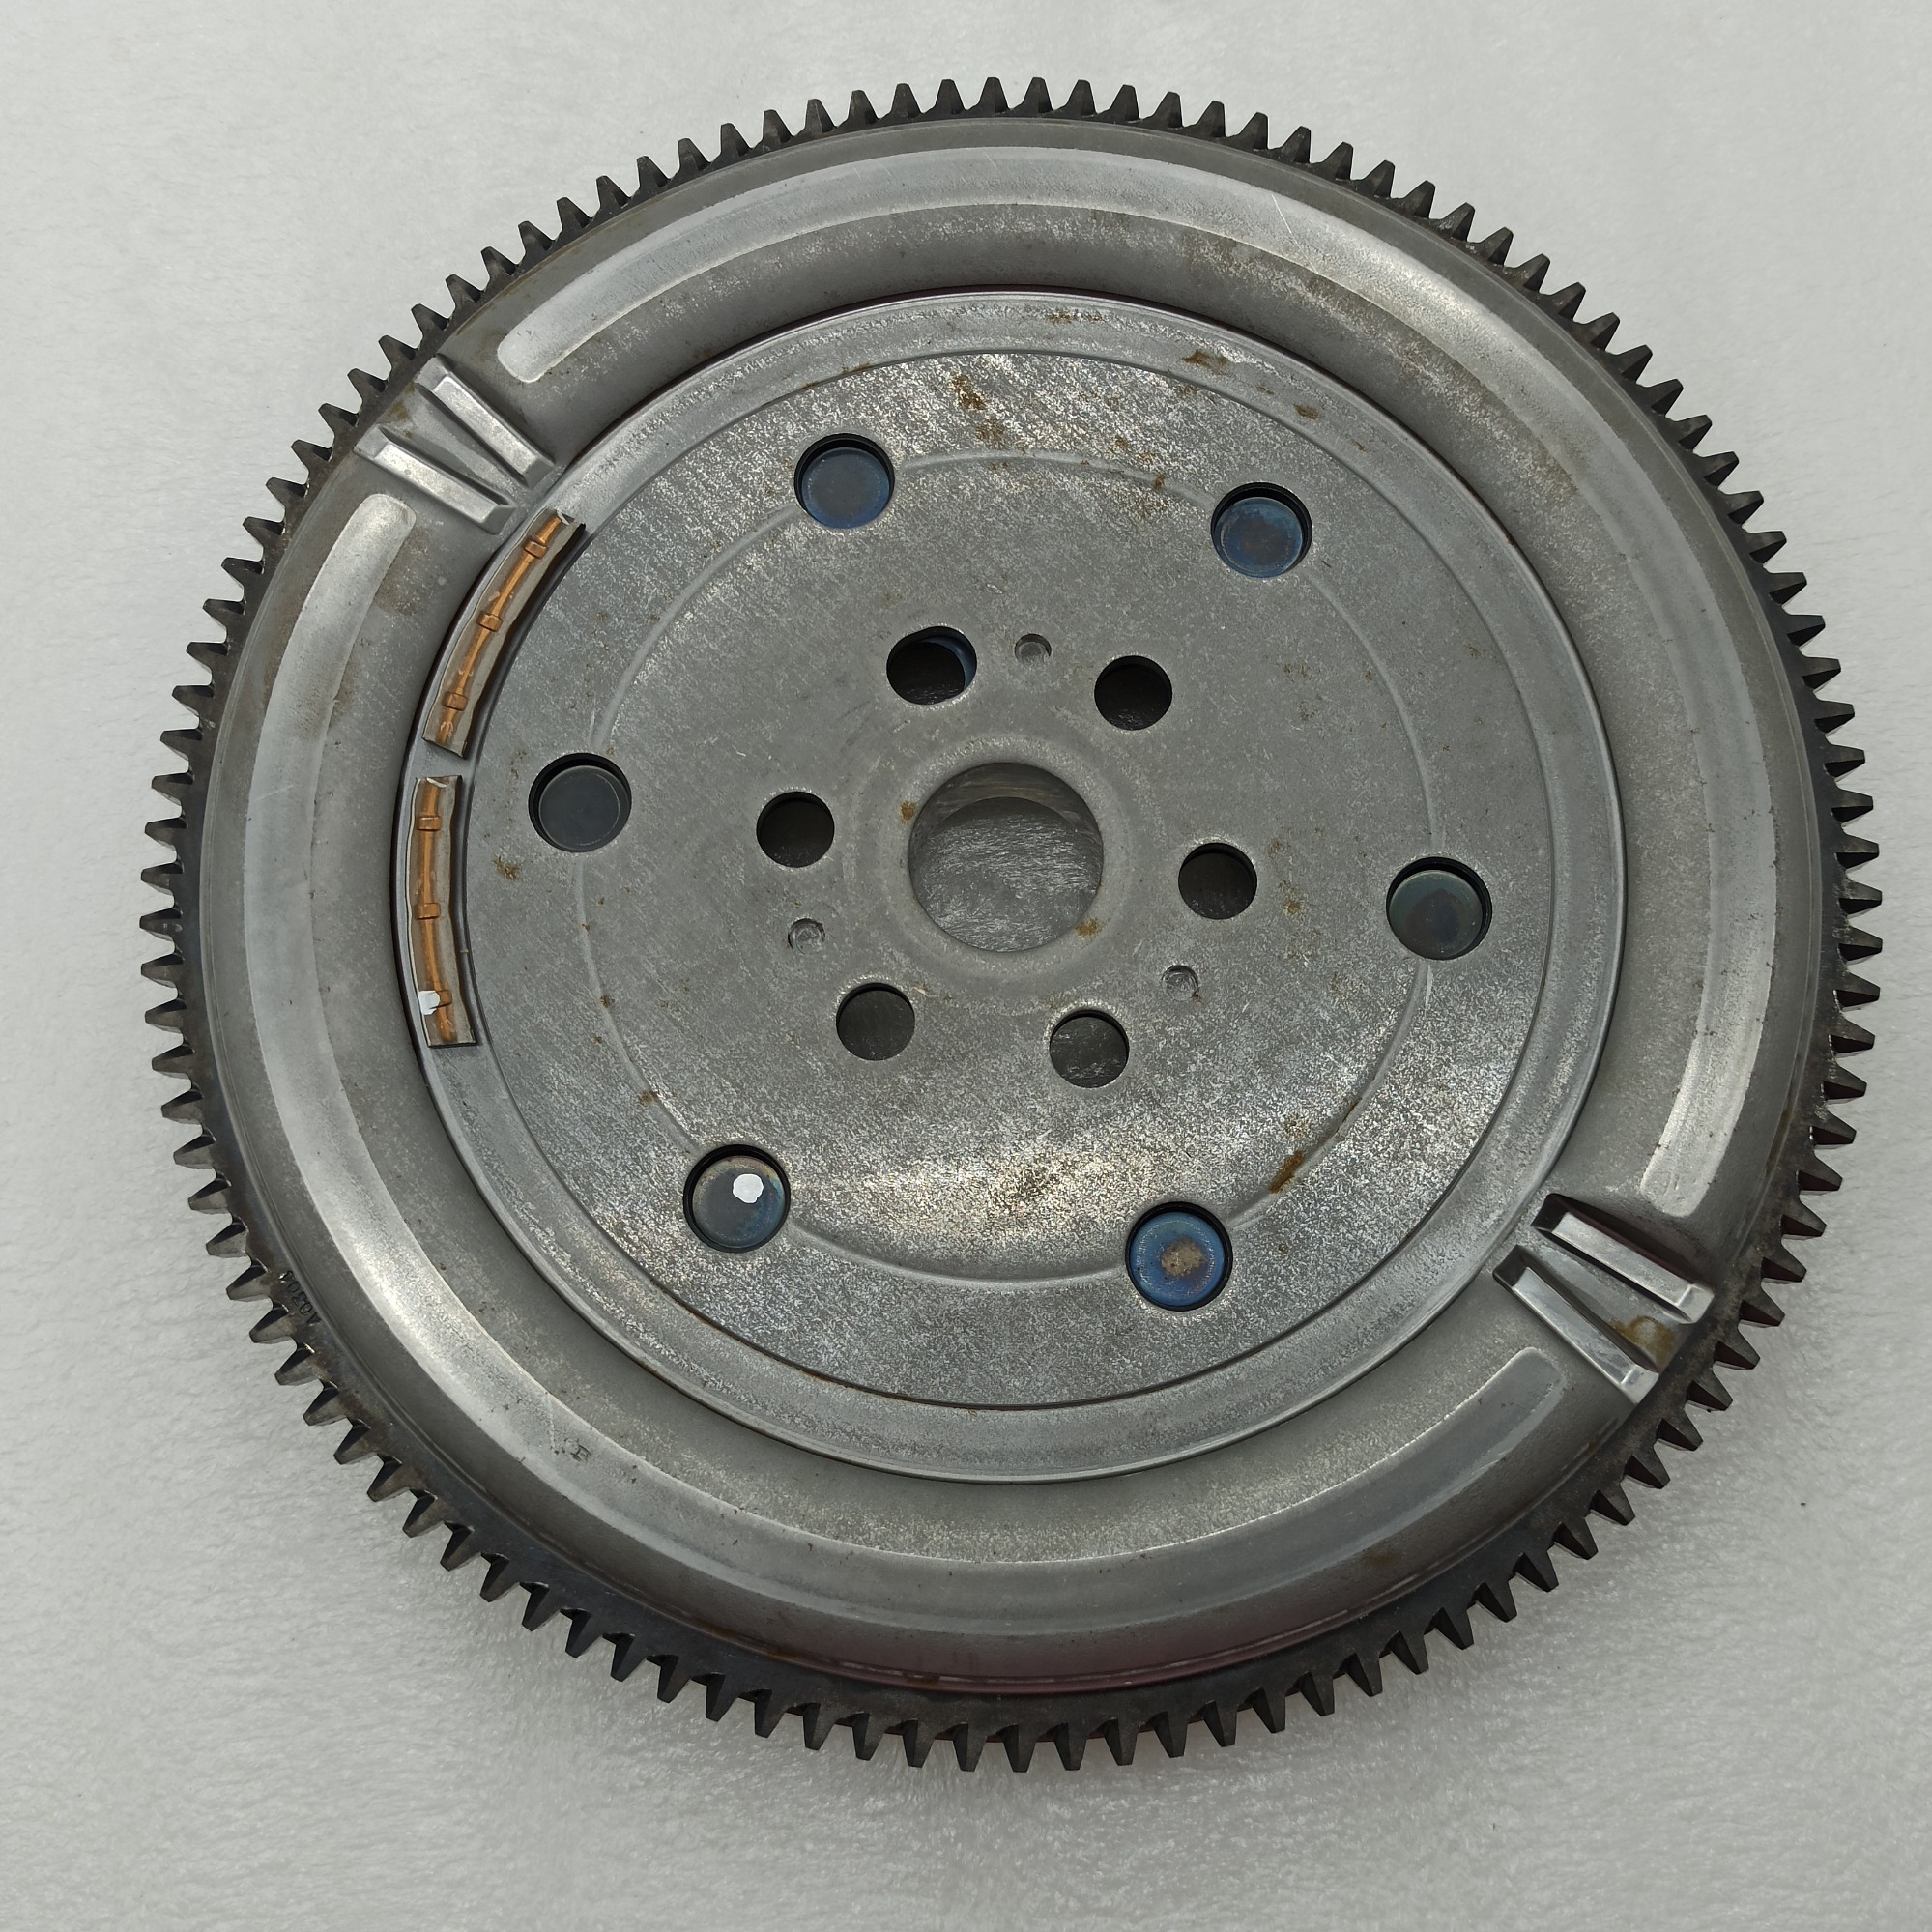 AATP-0086-OEM fly wheel GK21 6477HA, 4150703100 transfer case parts for repair or replace or test